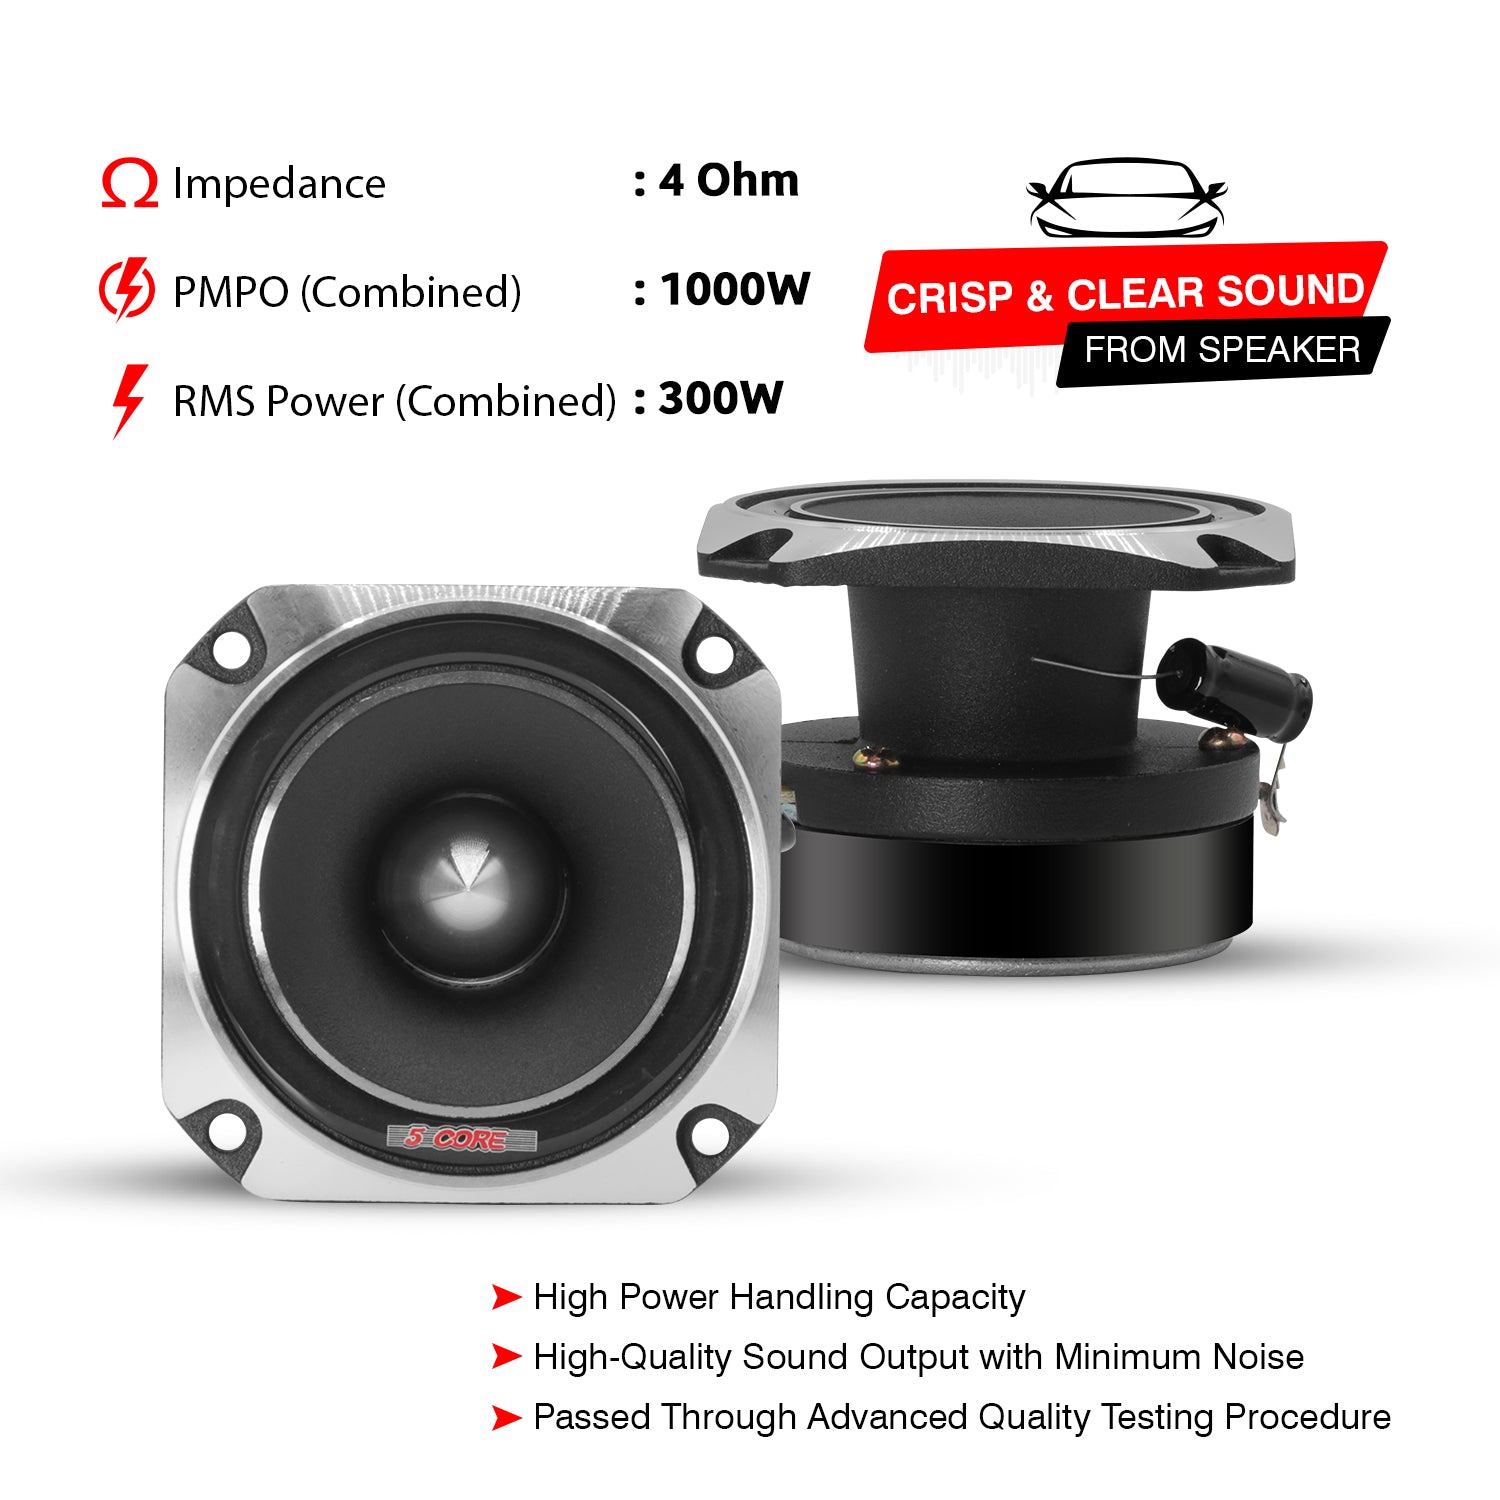 High-Performance Titanium Bullet Tweeters with 520W Max Power, 4 Ohm Impedance, 300w RMS for Crisp and Clear Audio.